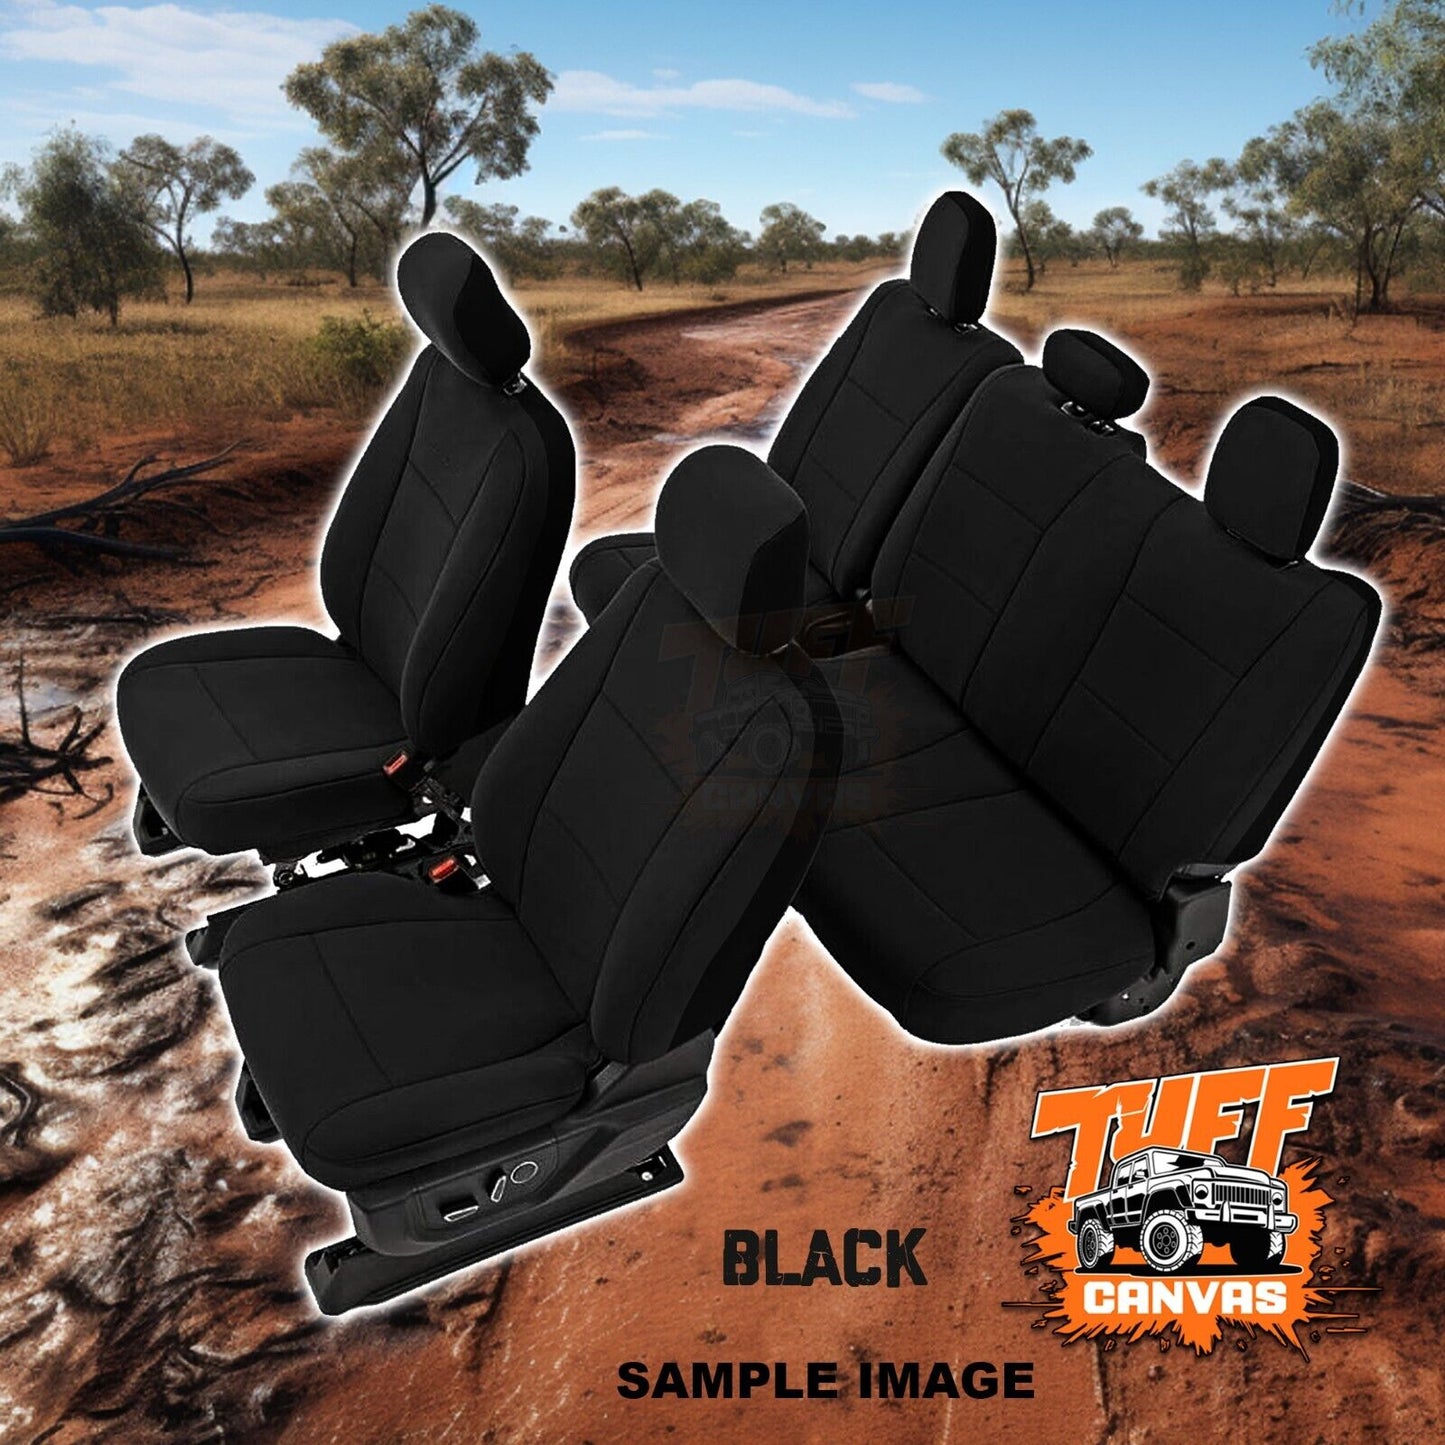 Black Tuff Canvas S2 Seat Covers 2 Rows For Ford Ranger PX2 PX3 XL XLT SPORT WILDTRACK 6/2015-4/2022